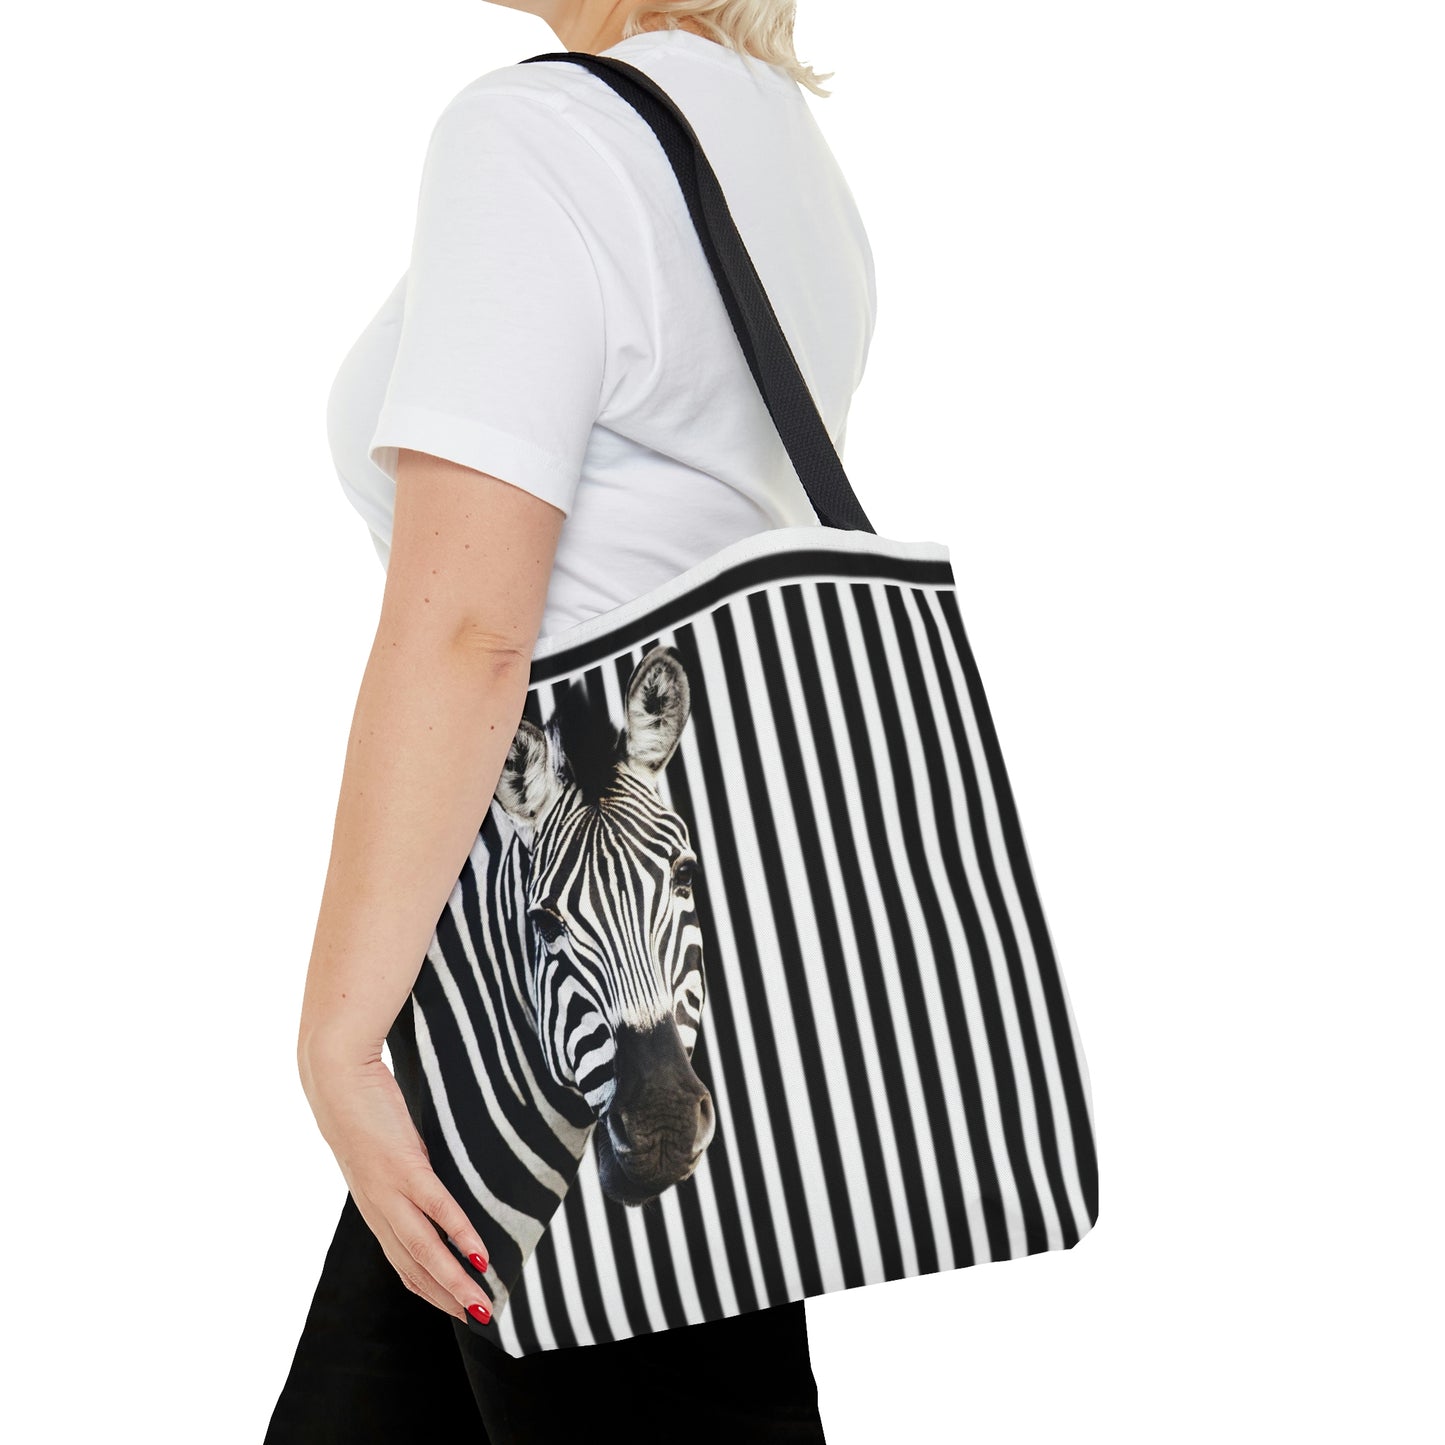 AOP Tote Bag "Zebra and striped background"